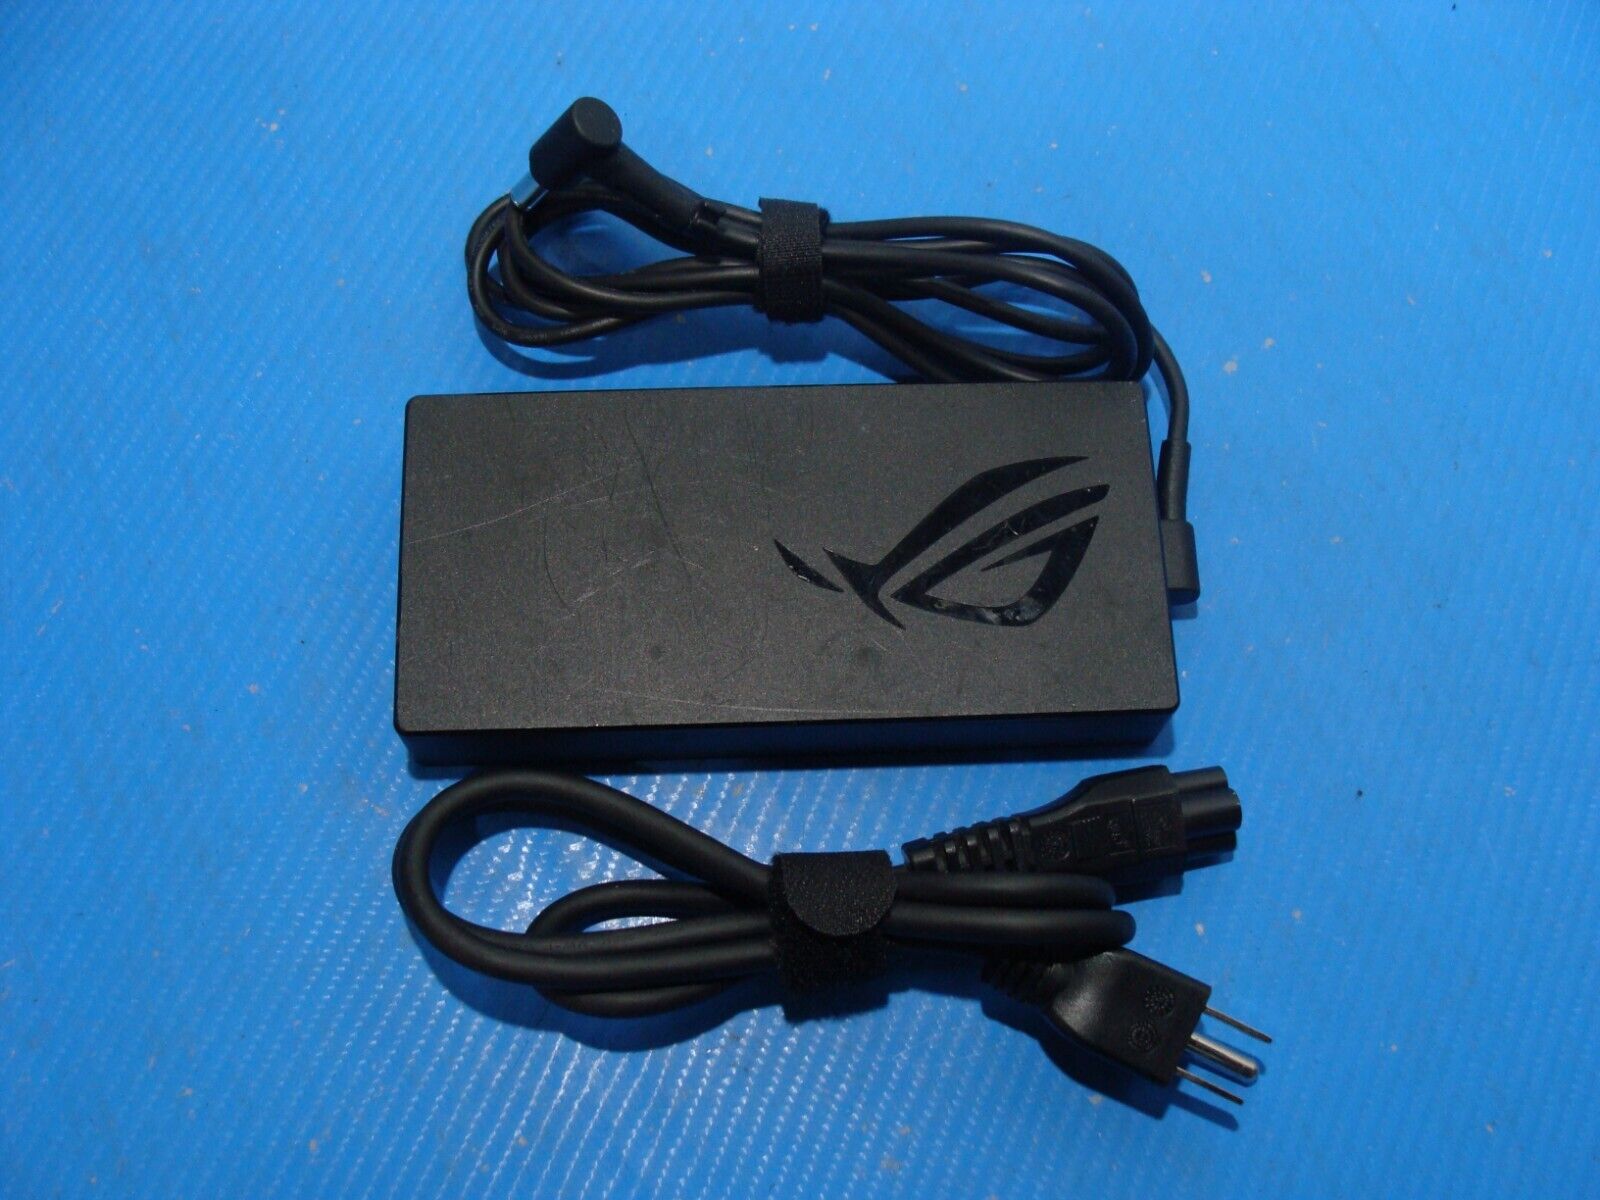 200W AC Adapter Charger For ASUS TUF Gaming A15 FA507RC FA507RE ADP-200JB D